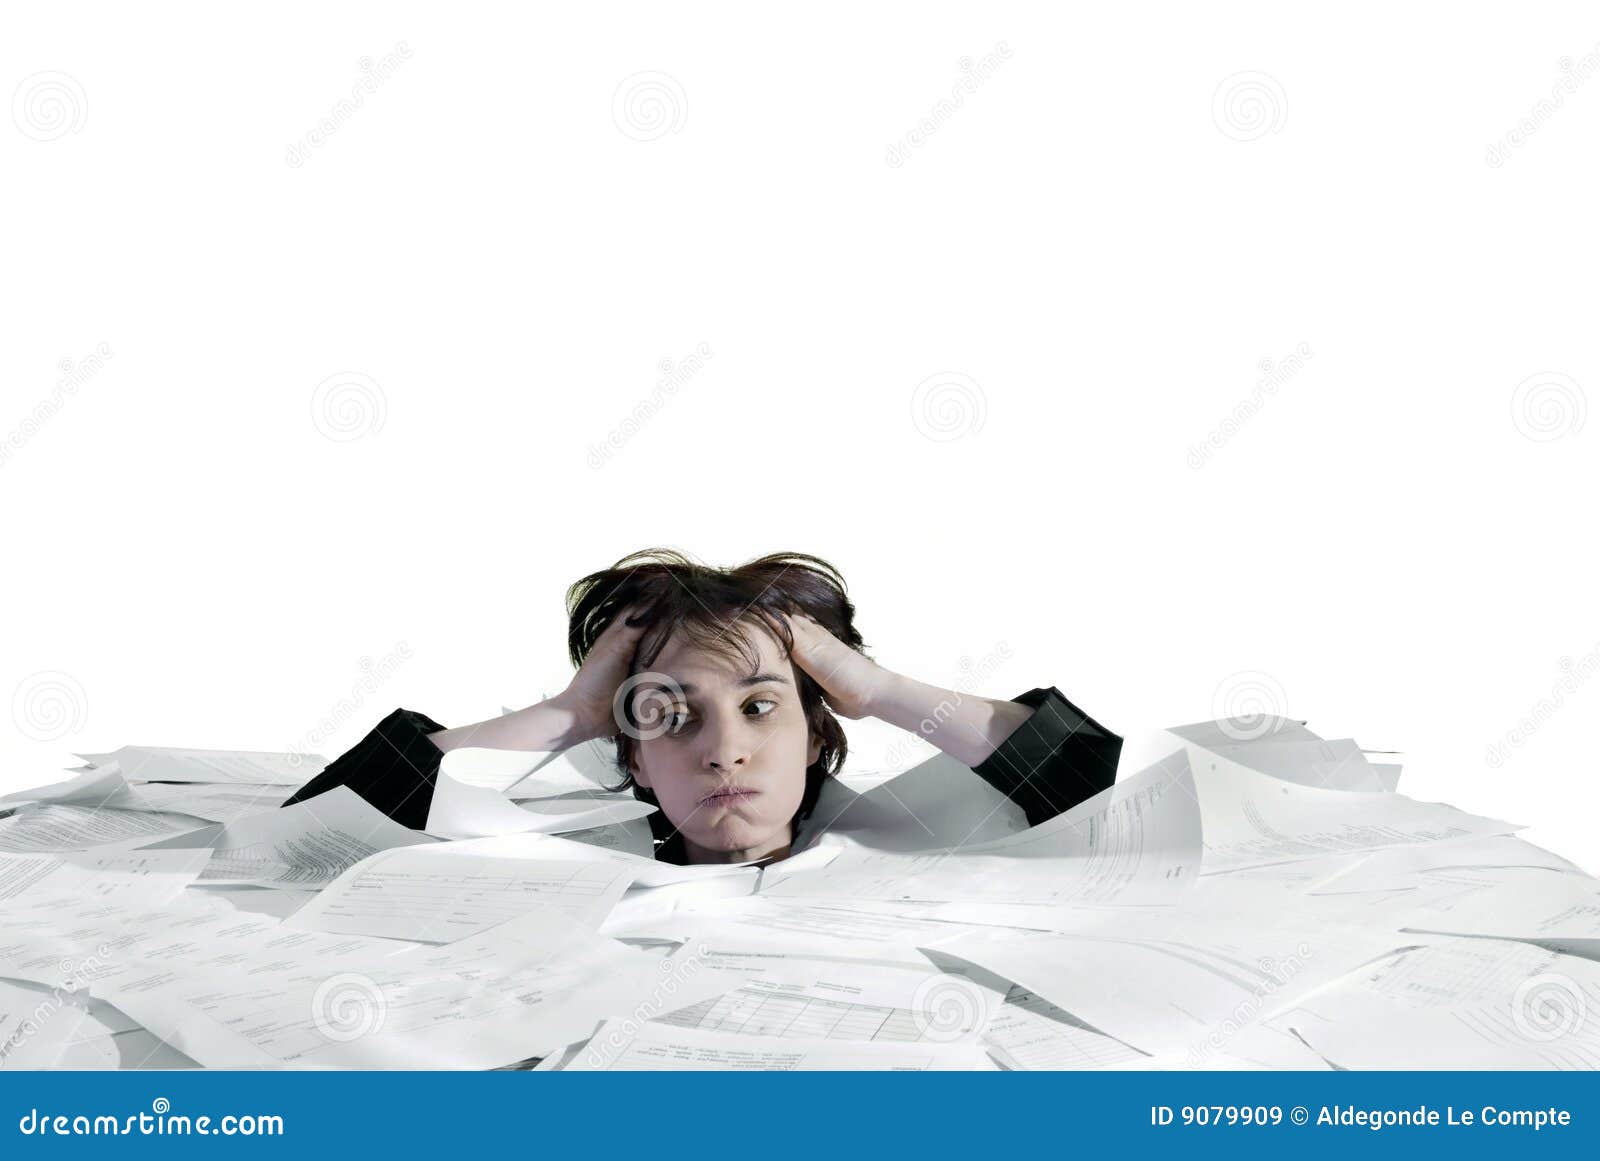 business woman sinking in an overload of paperwork